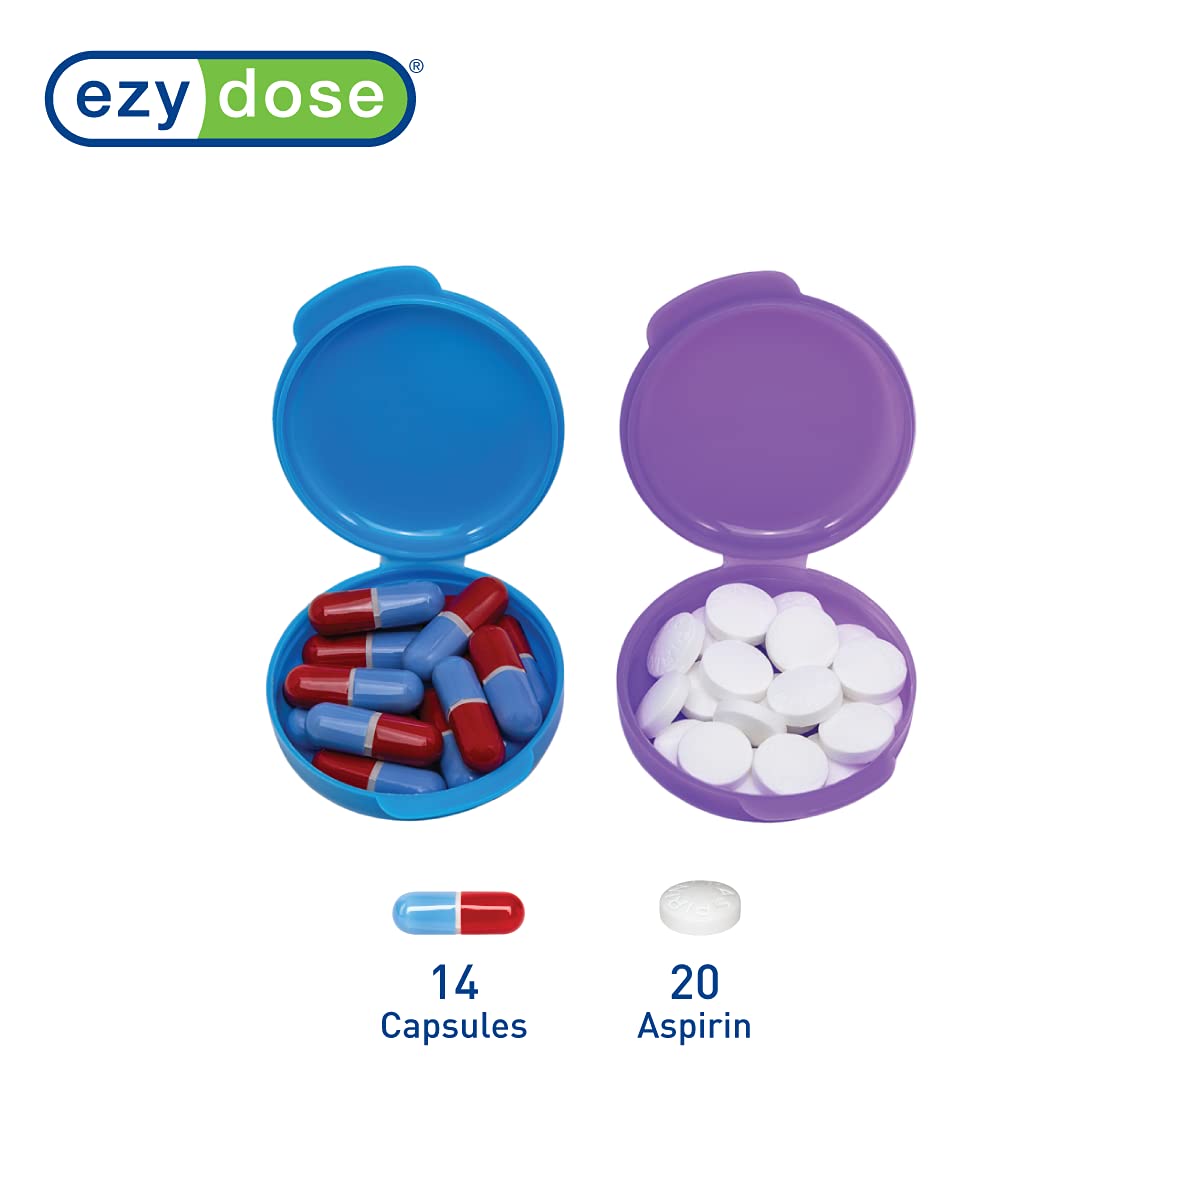 Ezy Dose Daily Round, Portable On-The-Go, Pill Box, Organizer and Vitamin Containers, Snap Shut Lids, Perfect For Traveling, Colors May Vary, 2 Pack